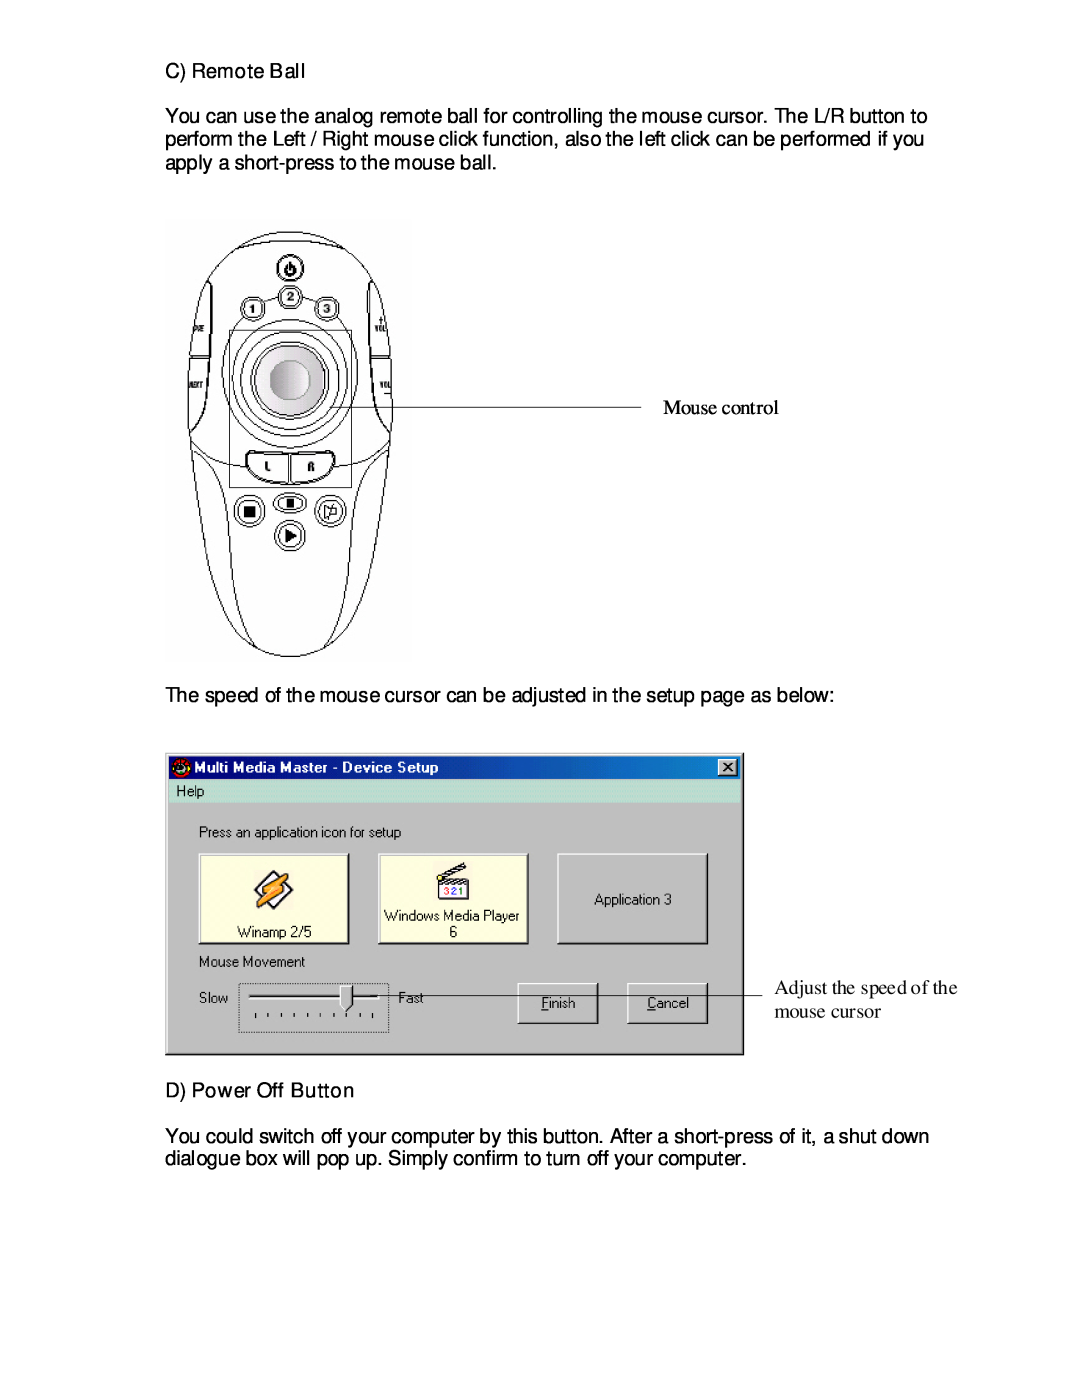 Remotec Multimedia Master Remote C Remote Ball, Mouse control, Adjust the speed of the mouse cursor, D Power Off Button 